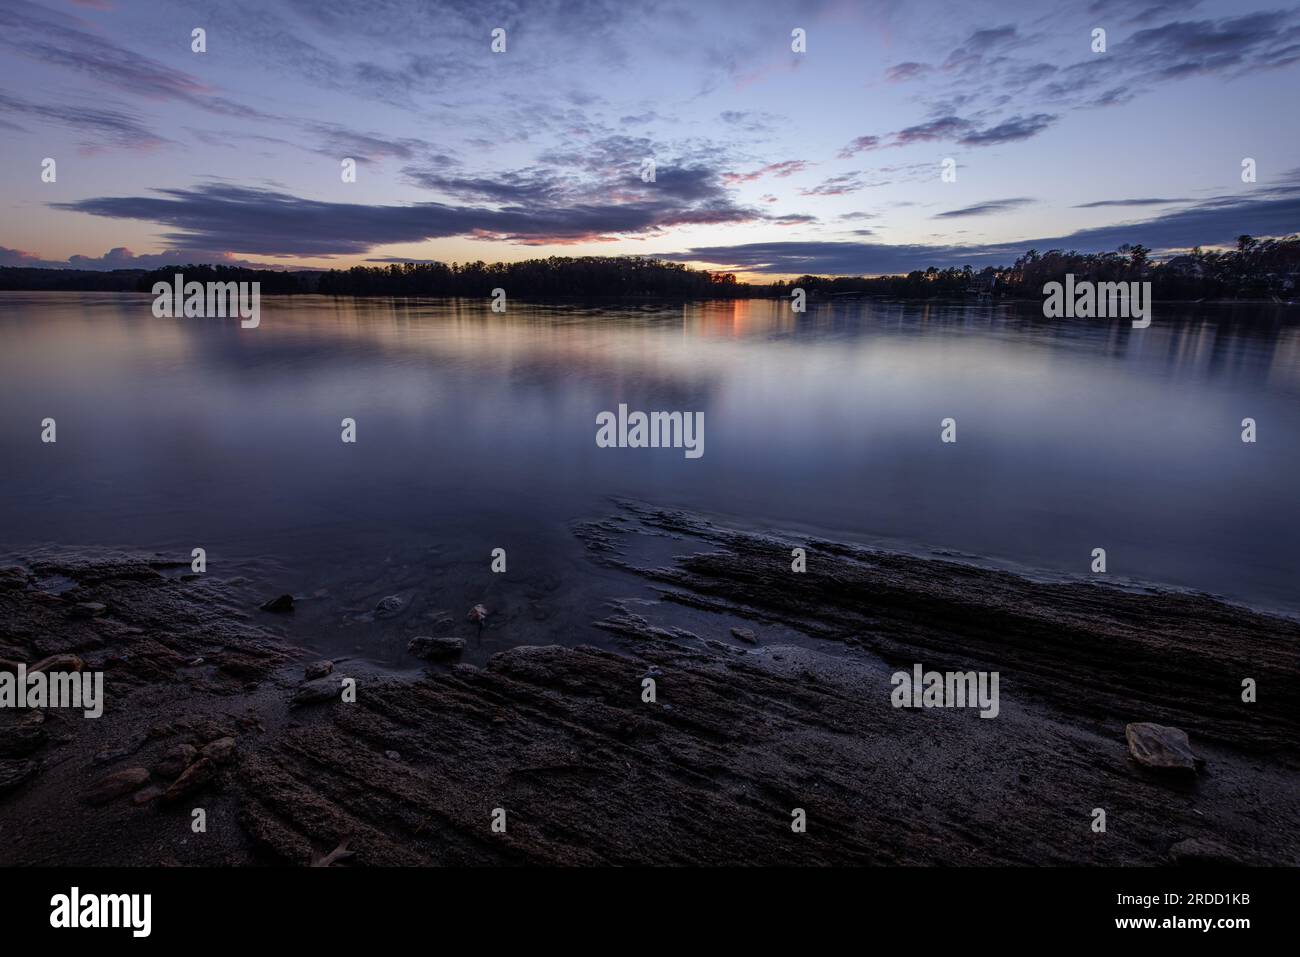 Warm colors fade to the blue hour as the sun falls below the horizon on Lake Lanier. Stock Photo